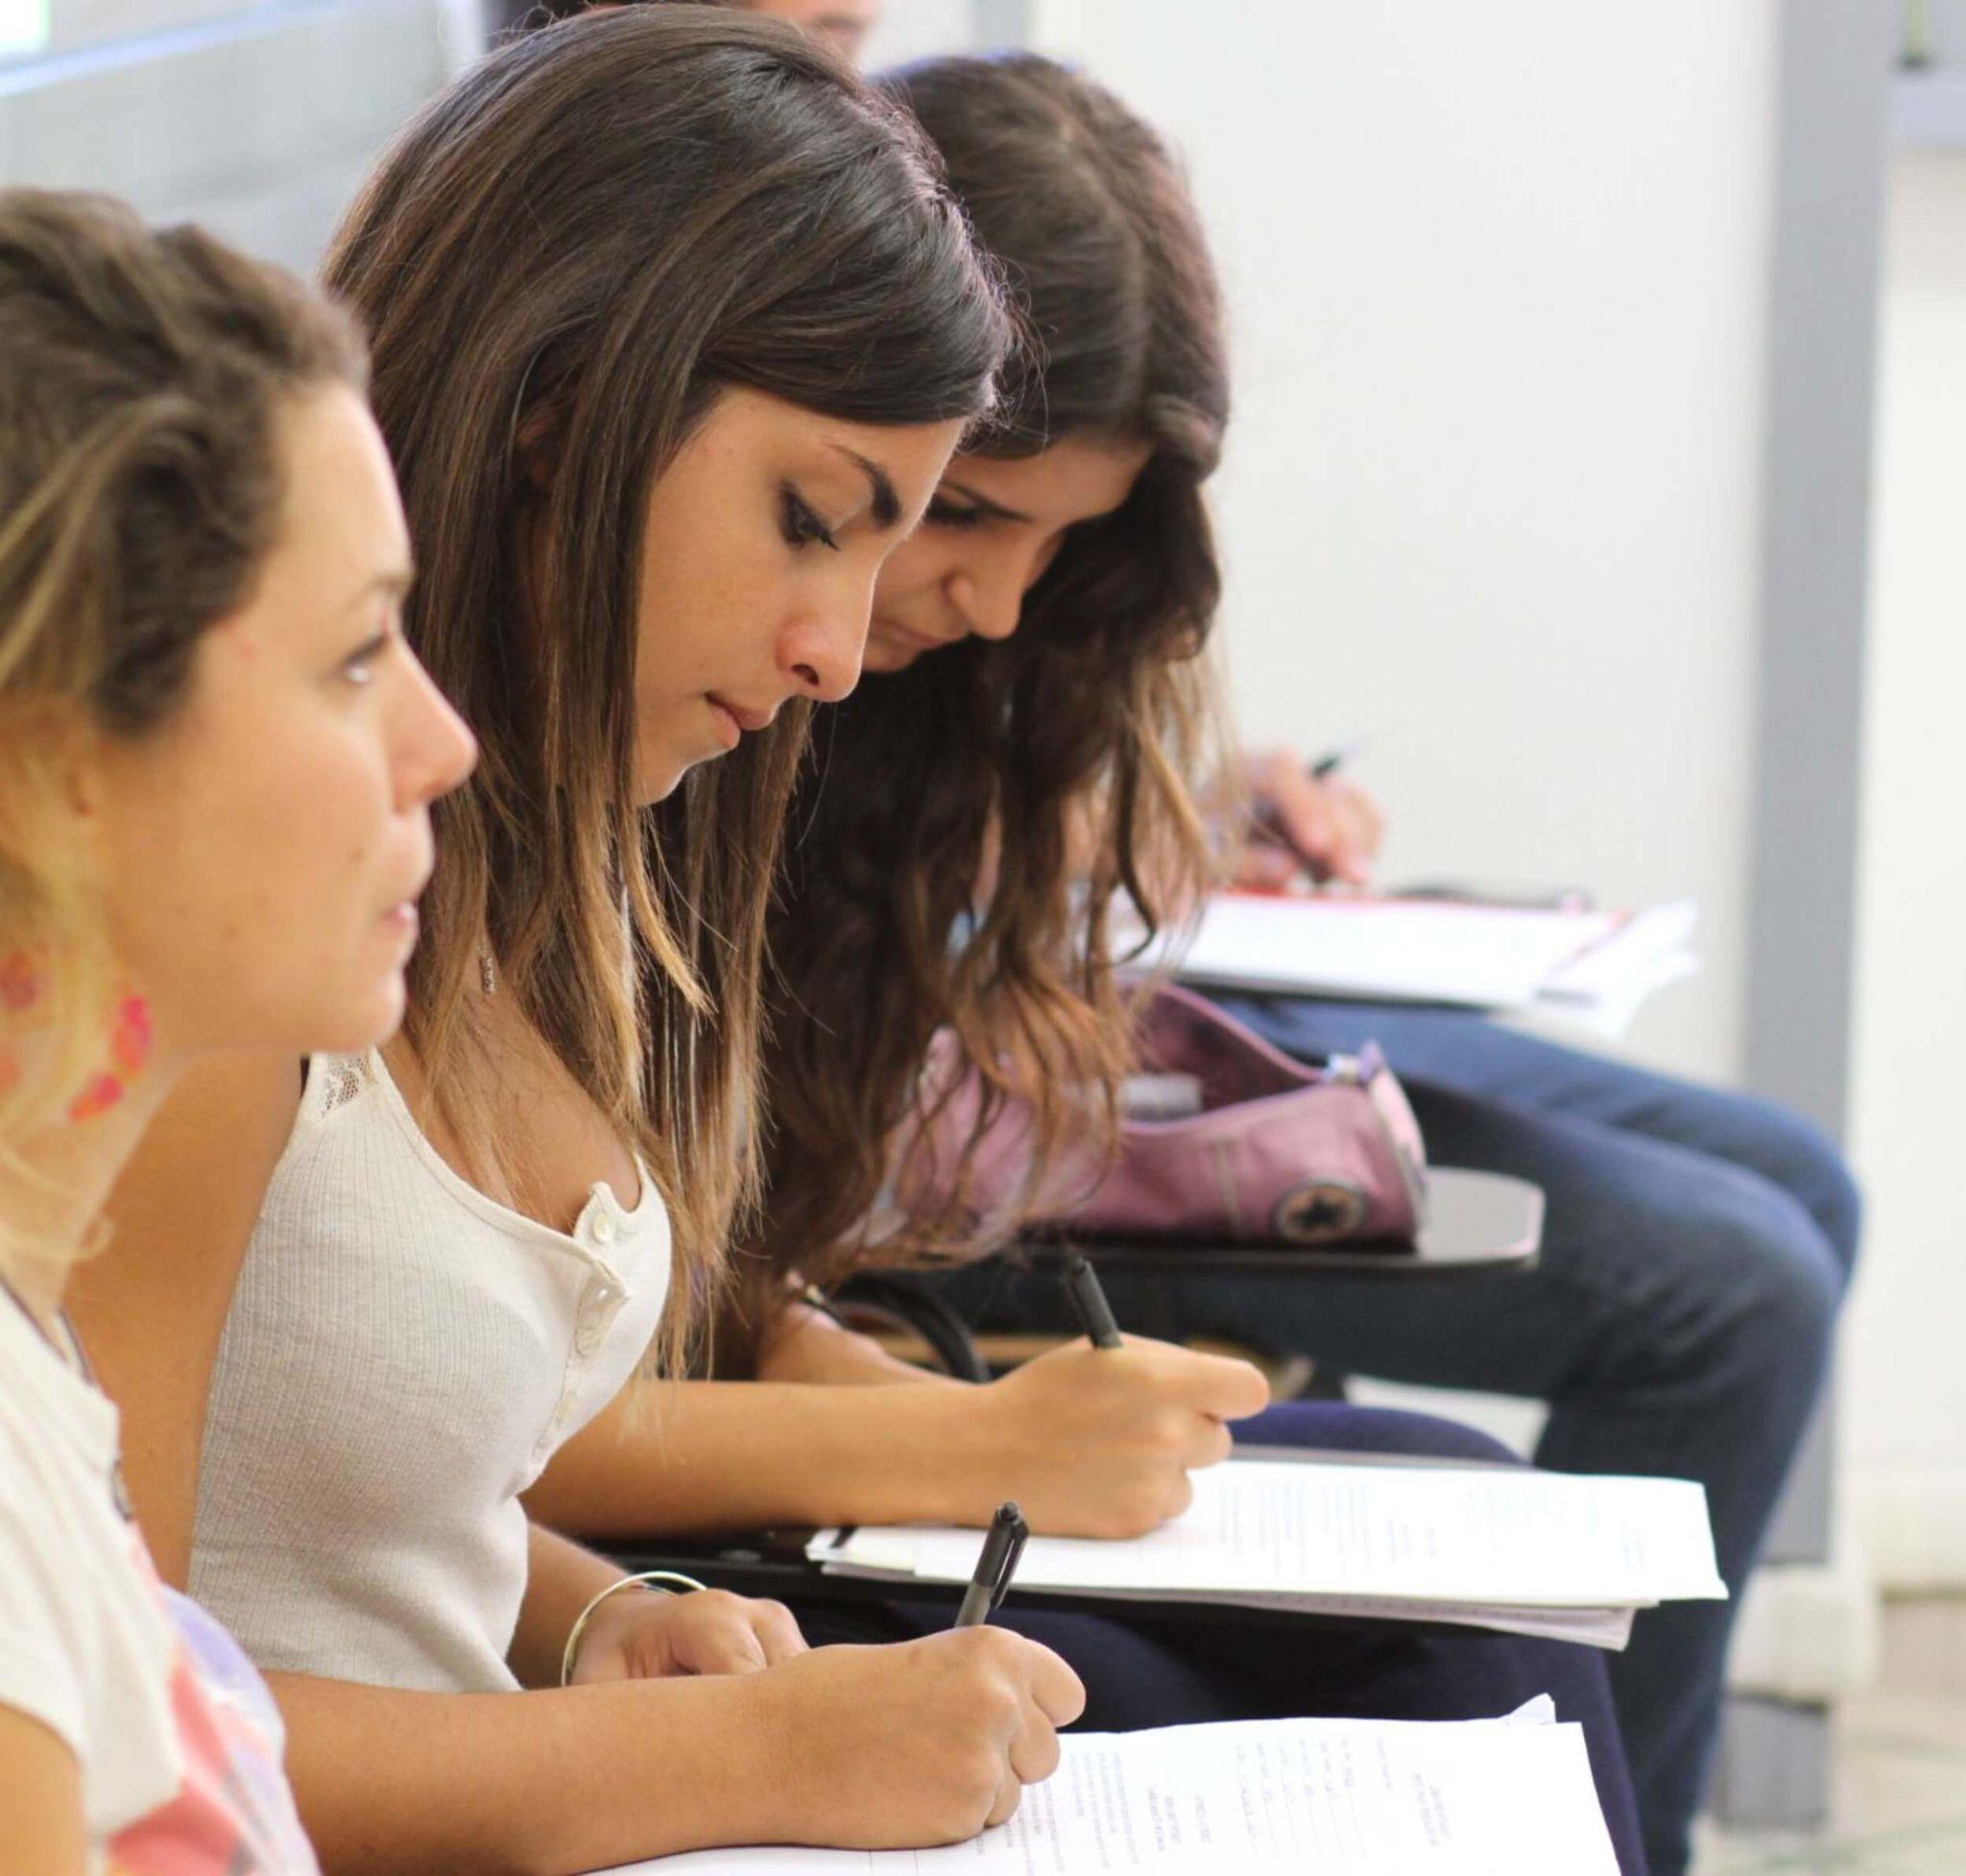 A class of students attending university in Rome working independently in a classroom